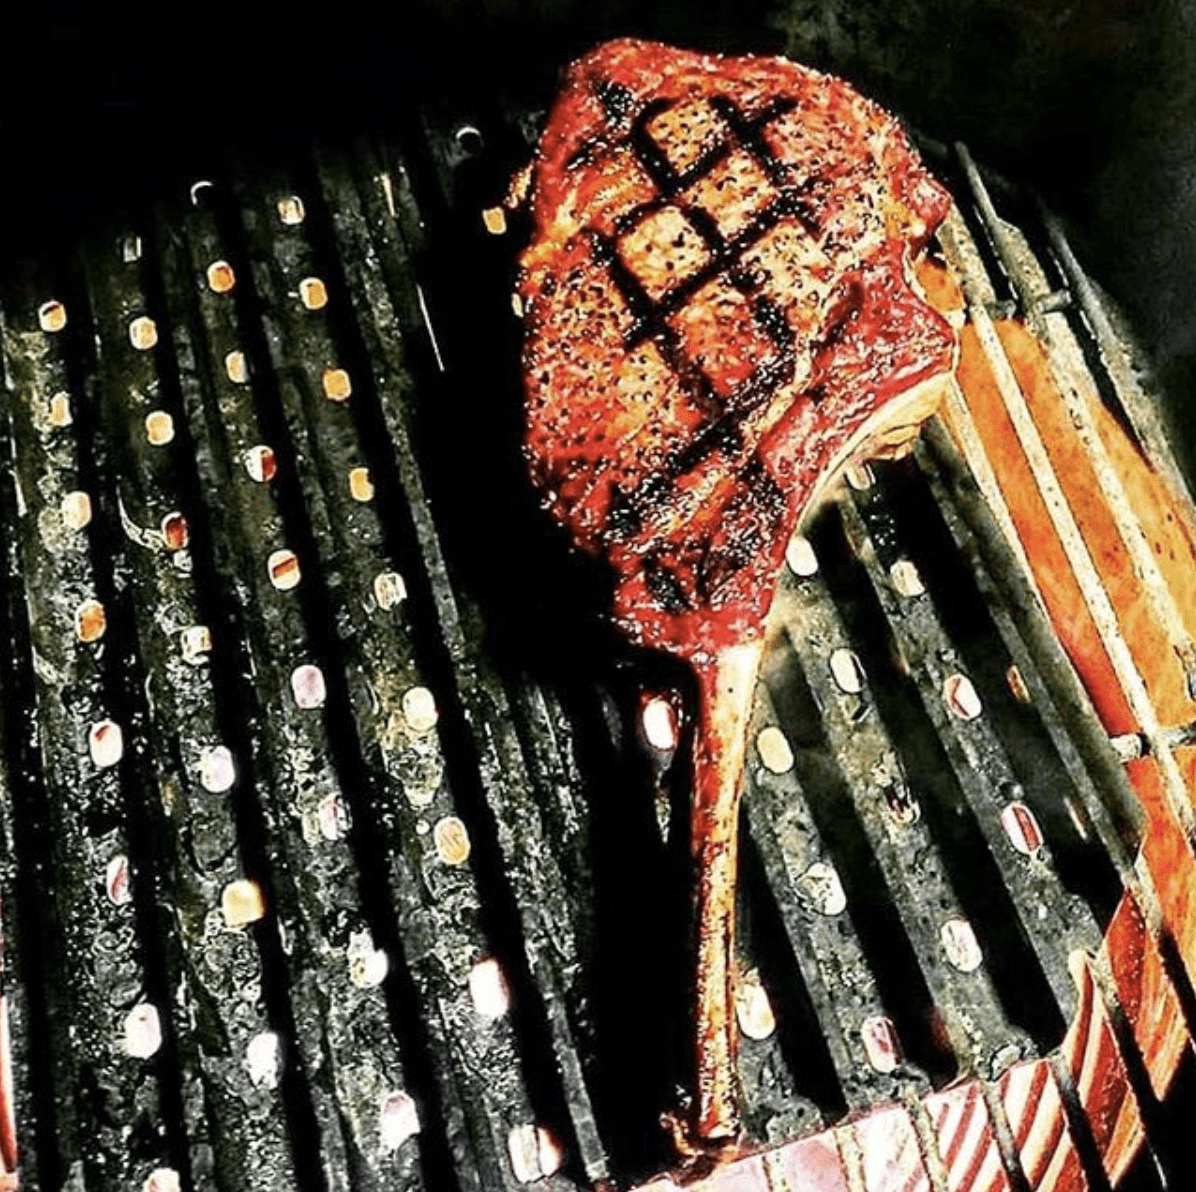 Nothing like a bone in ribeye to brighten up this hump day! Thanks for the eye candy,